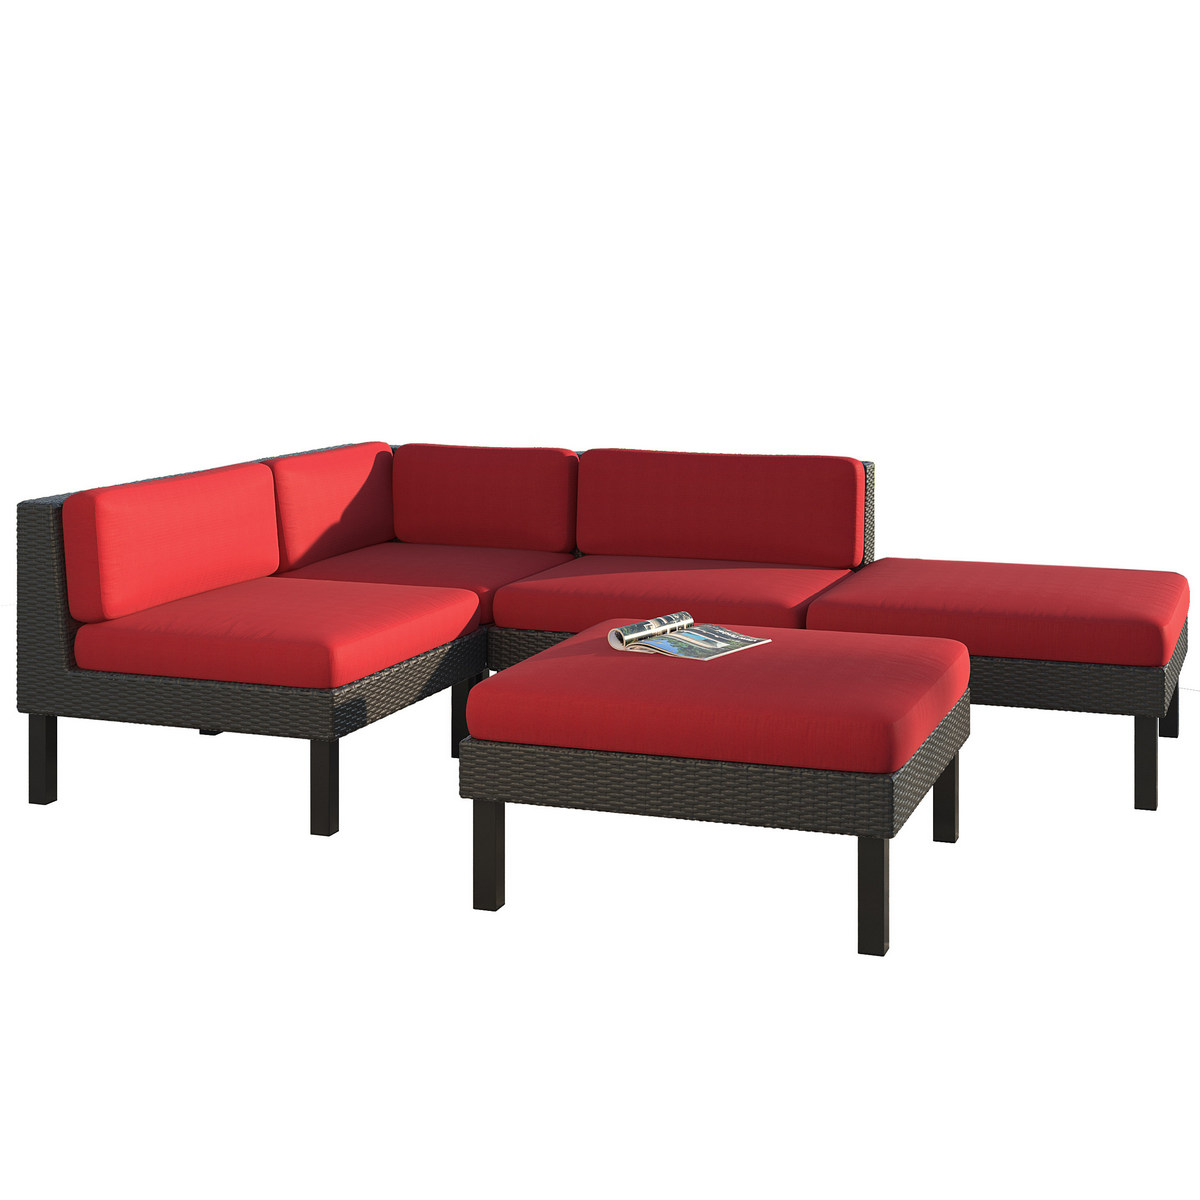 Sectional Chaise Lounge Patio Set